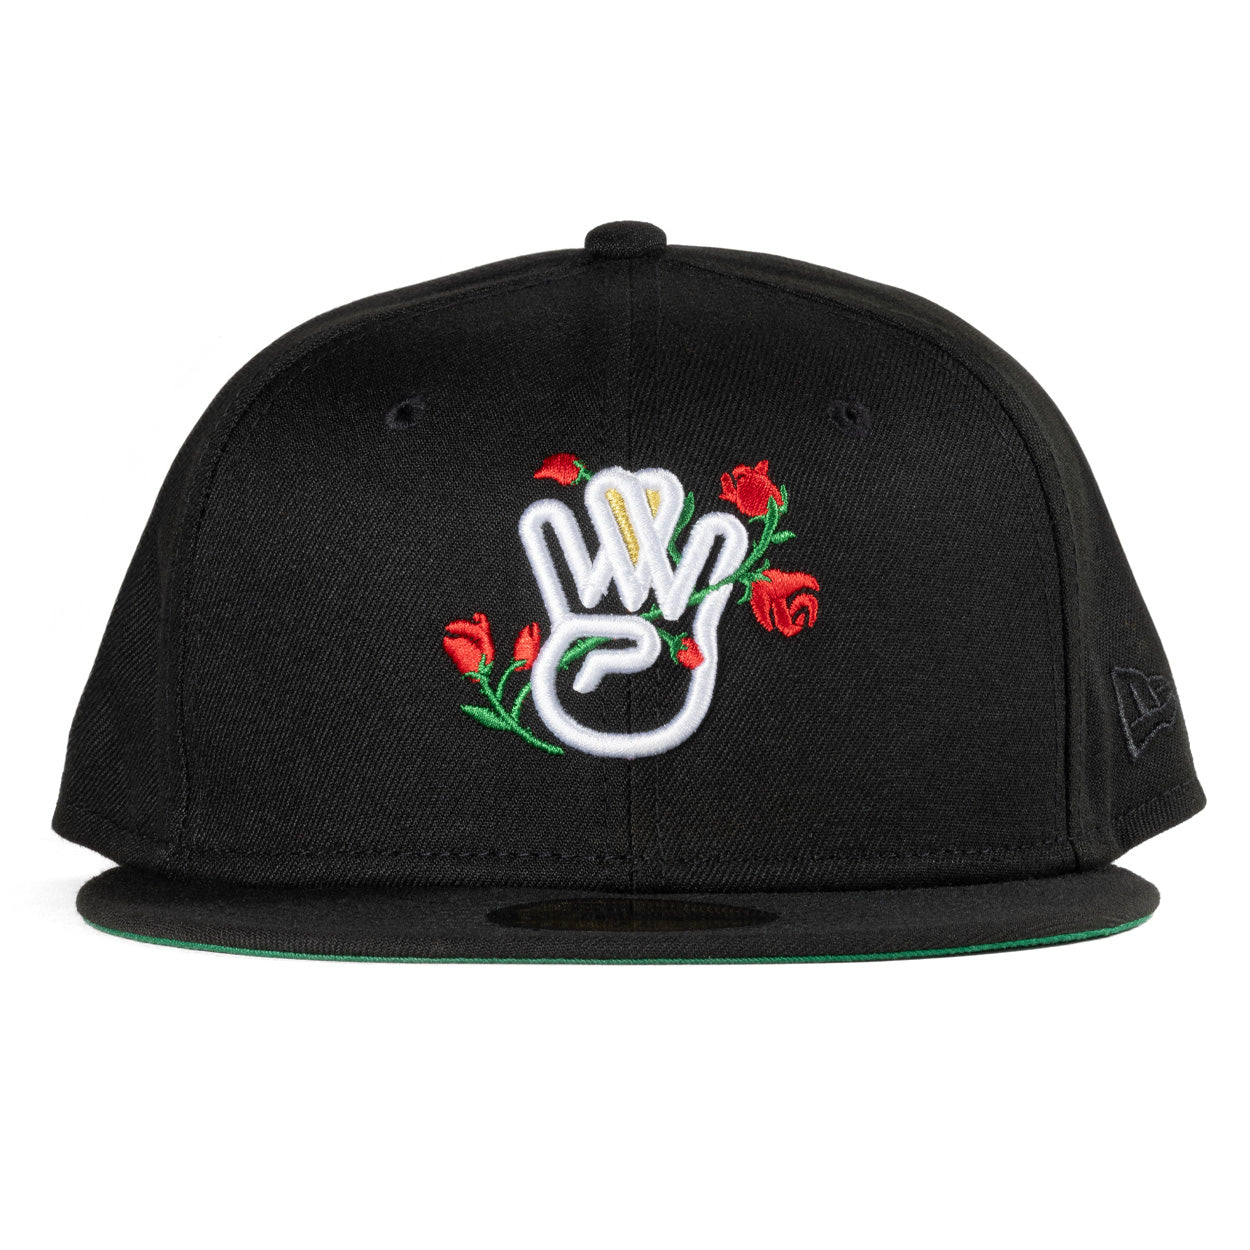 Rose From The Concrete New Era Snapback